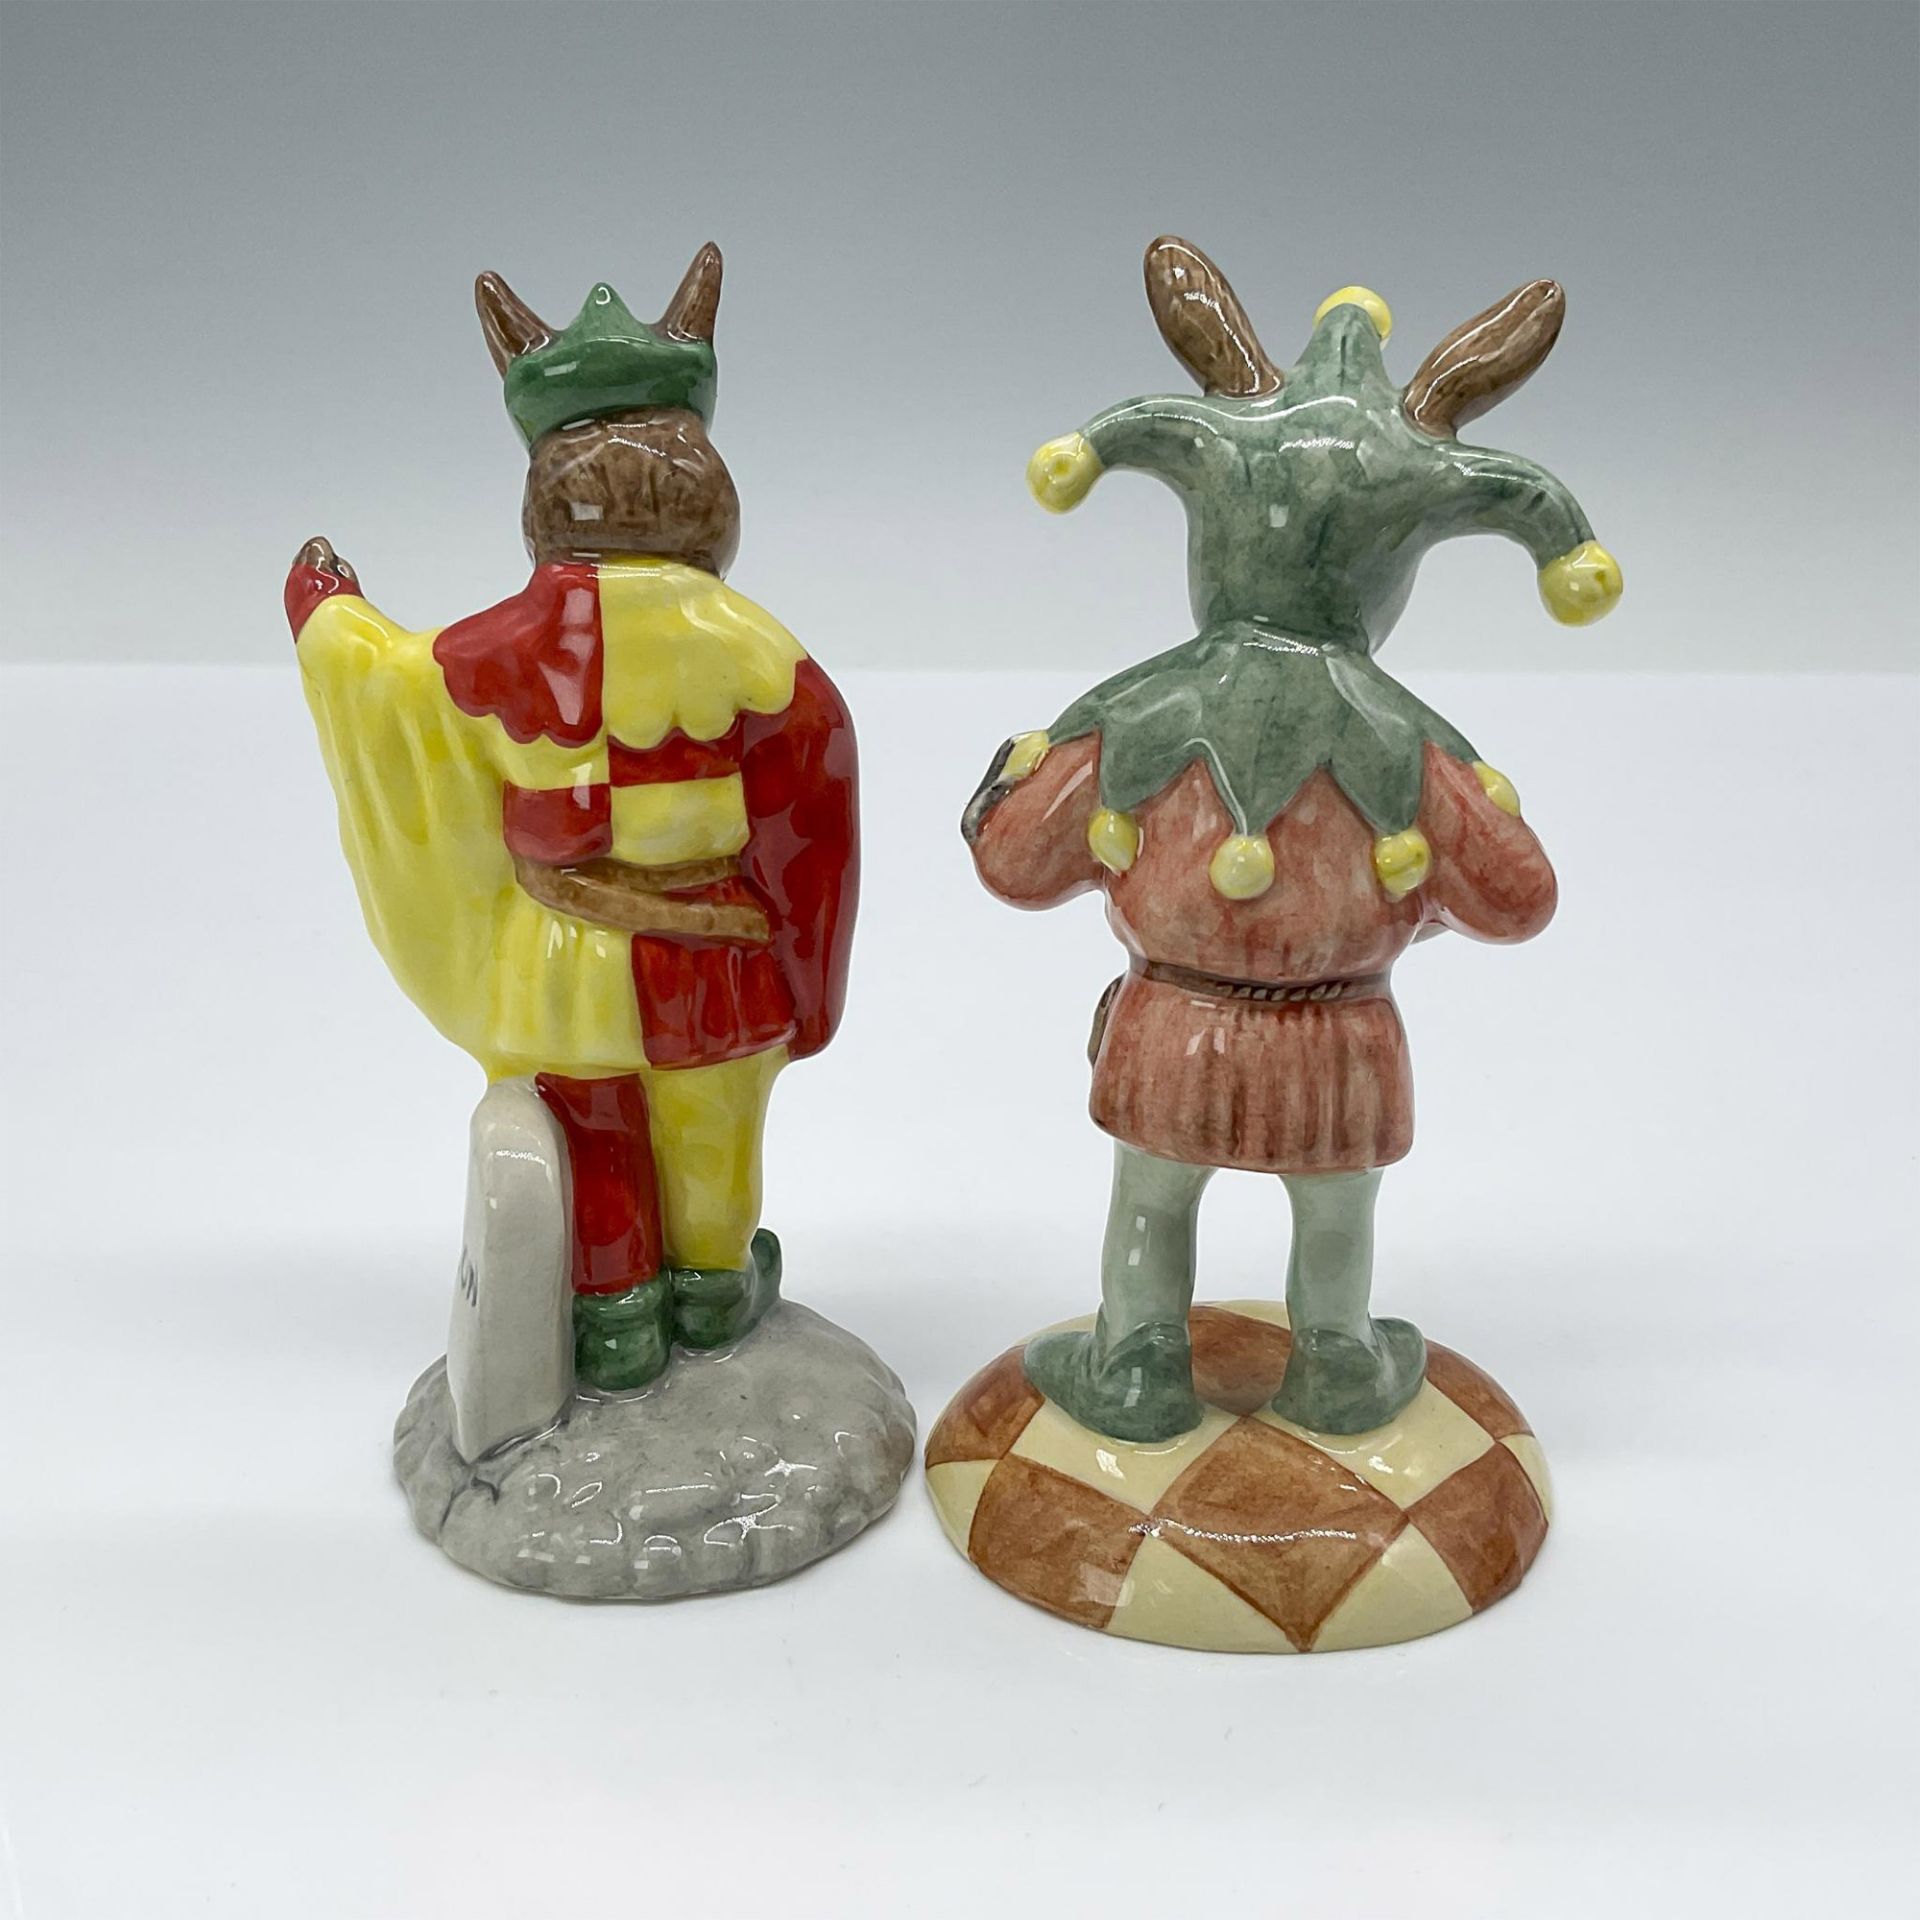 2pc Royal Doulton Bunnykins Figurines, Minstrel and Jester - Image 2 of 3